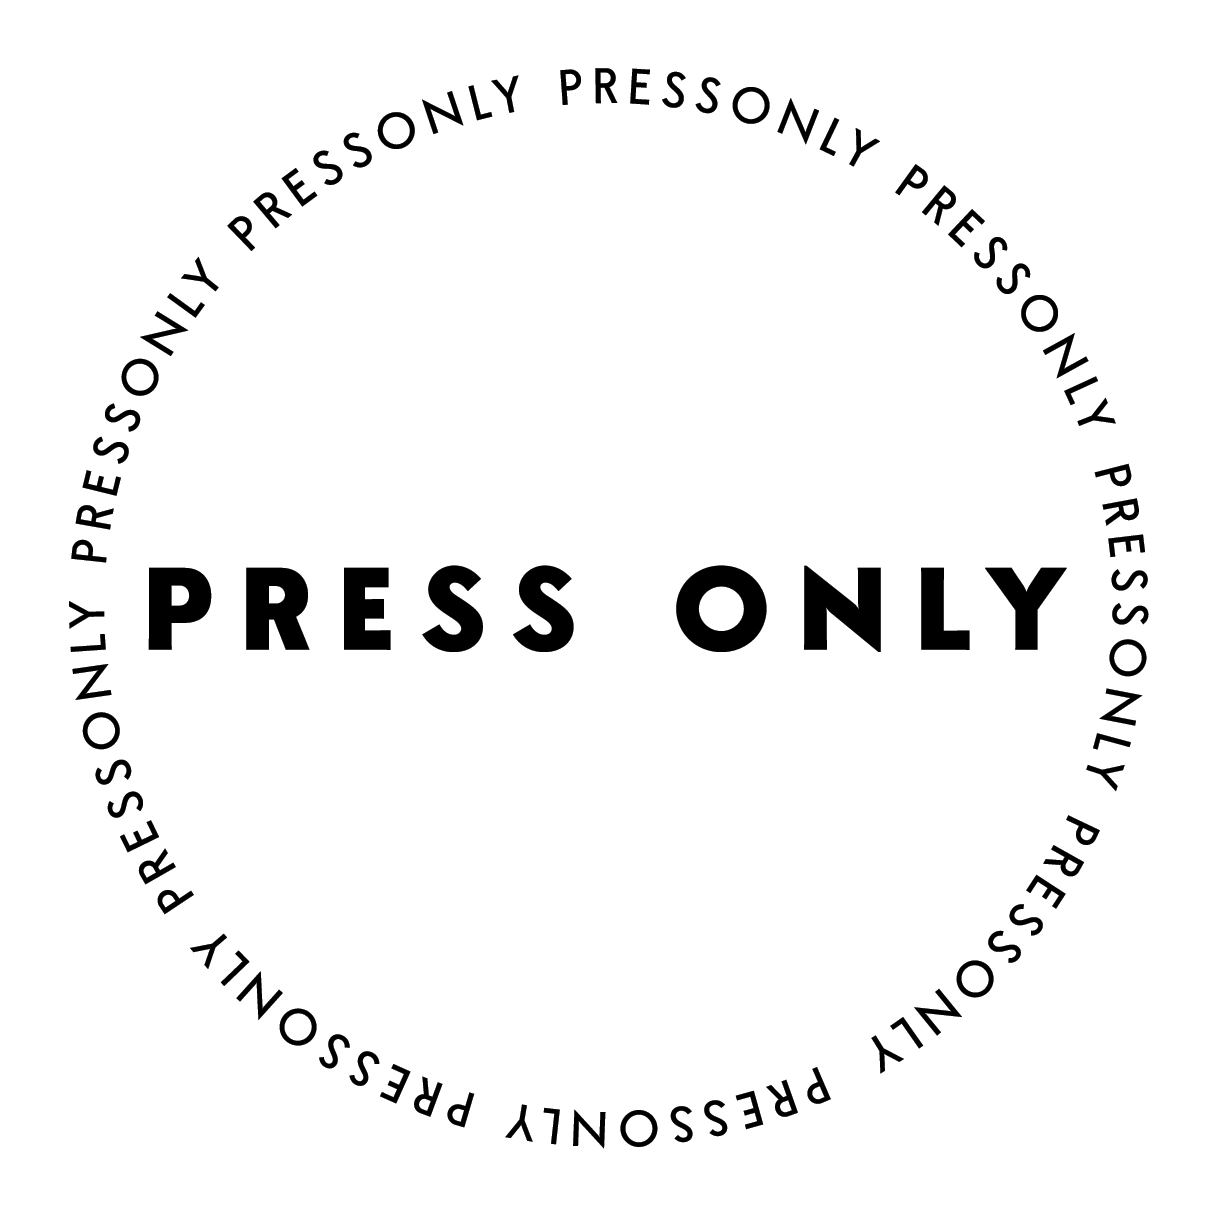 PRESS ONLY - BAKERY OPEN